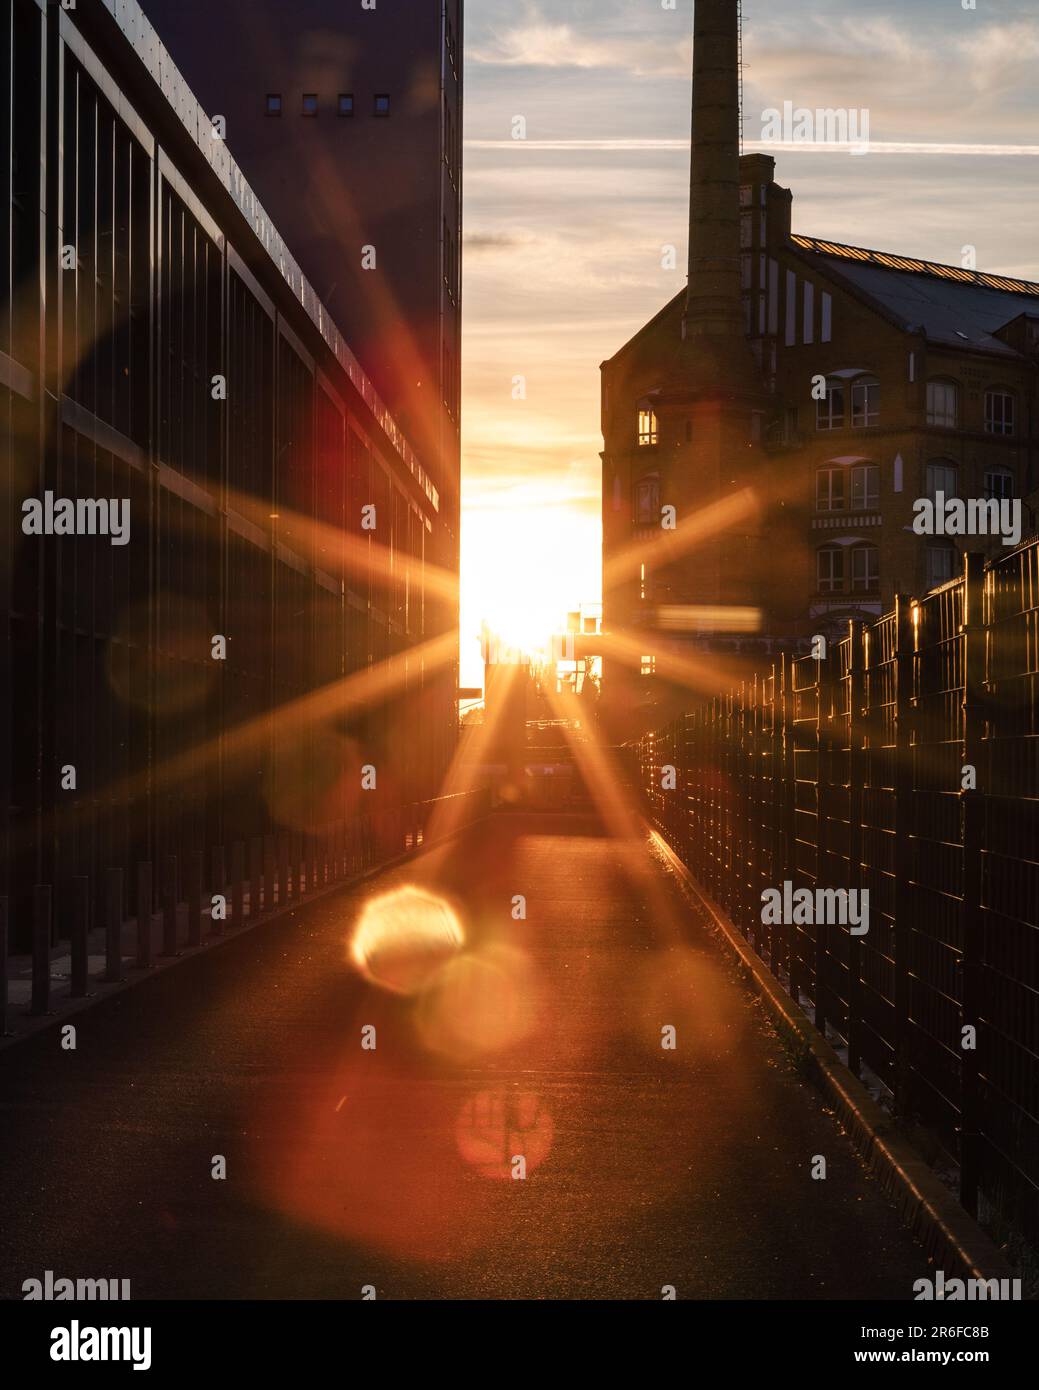 A sunset in an industrial area, showing lens flares. Berlin, Schöneweide. Stock Photo